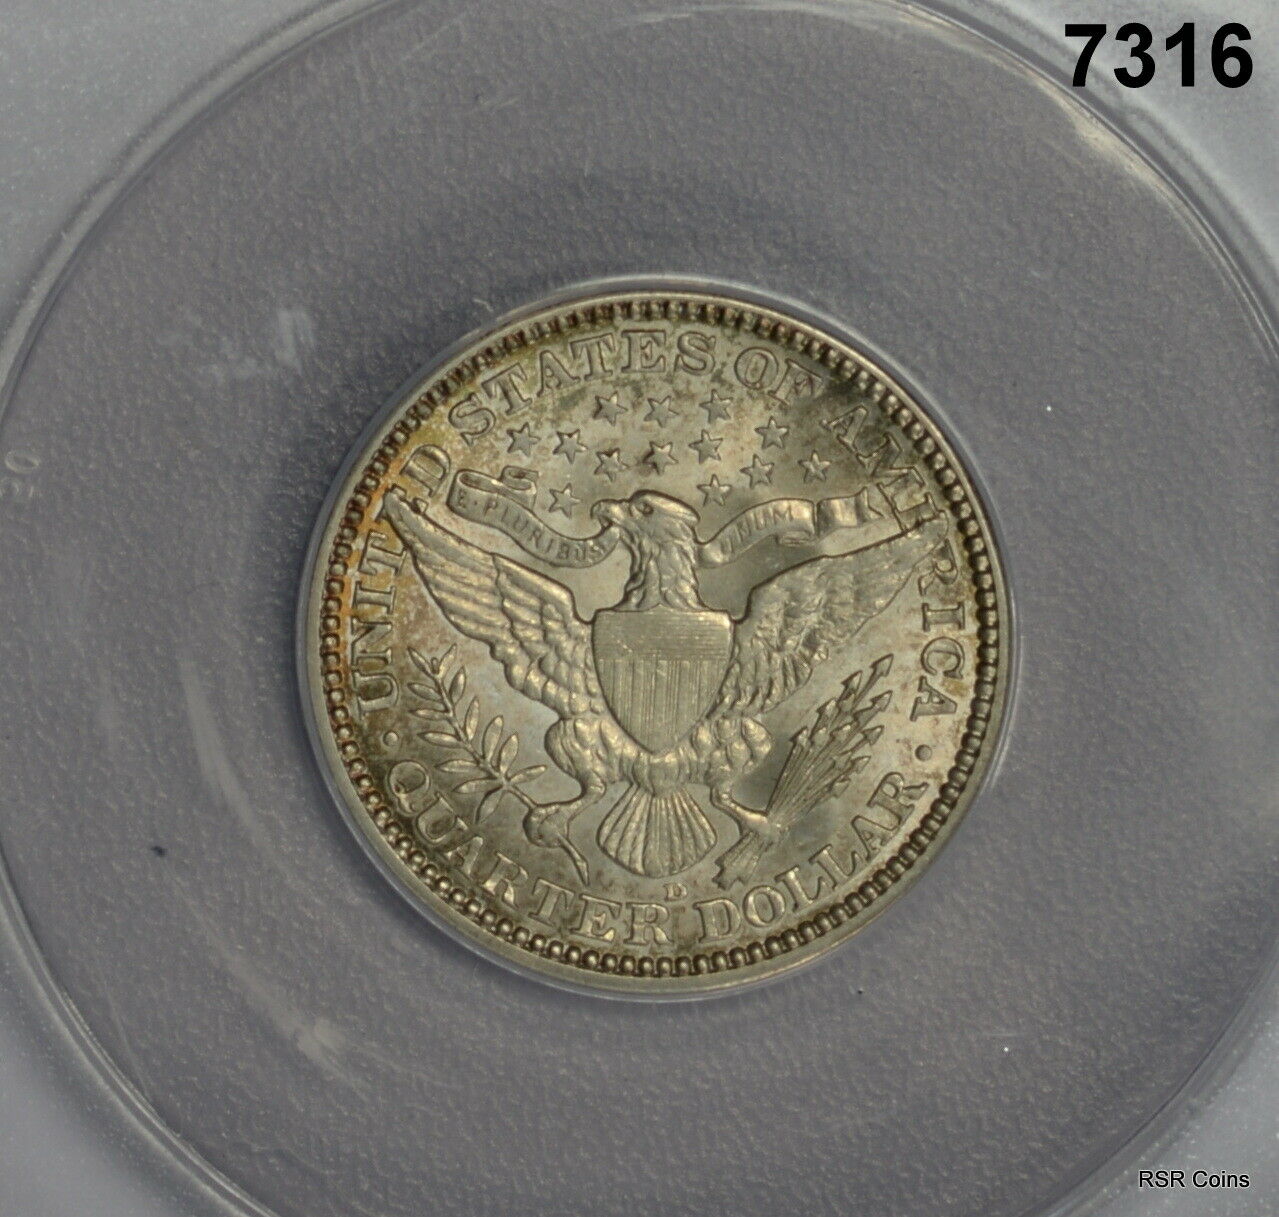 1915 D BARBER QUARTER ANACS CERTIFIED AU50 LOOK UNCIRCULATED WITH LUSTER! #7316